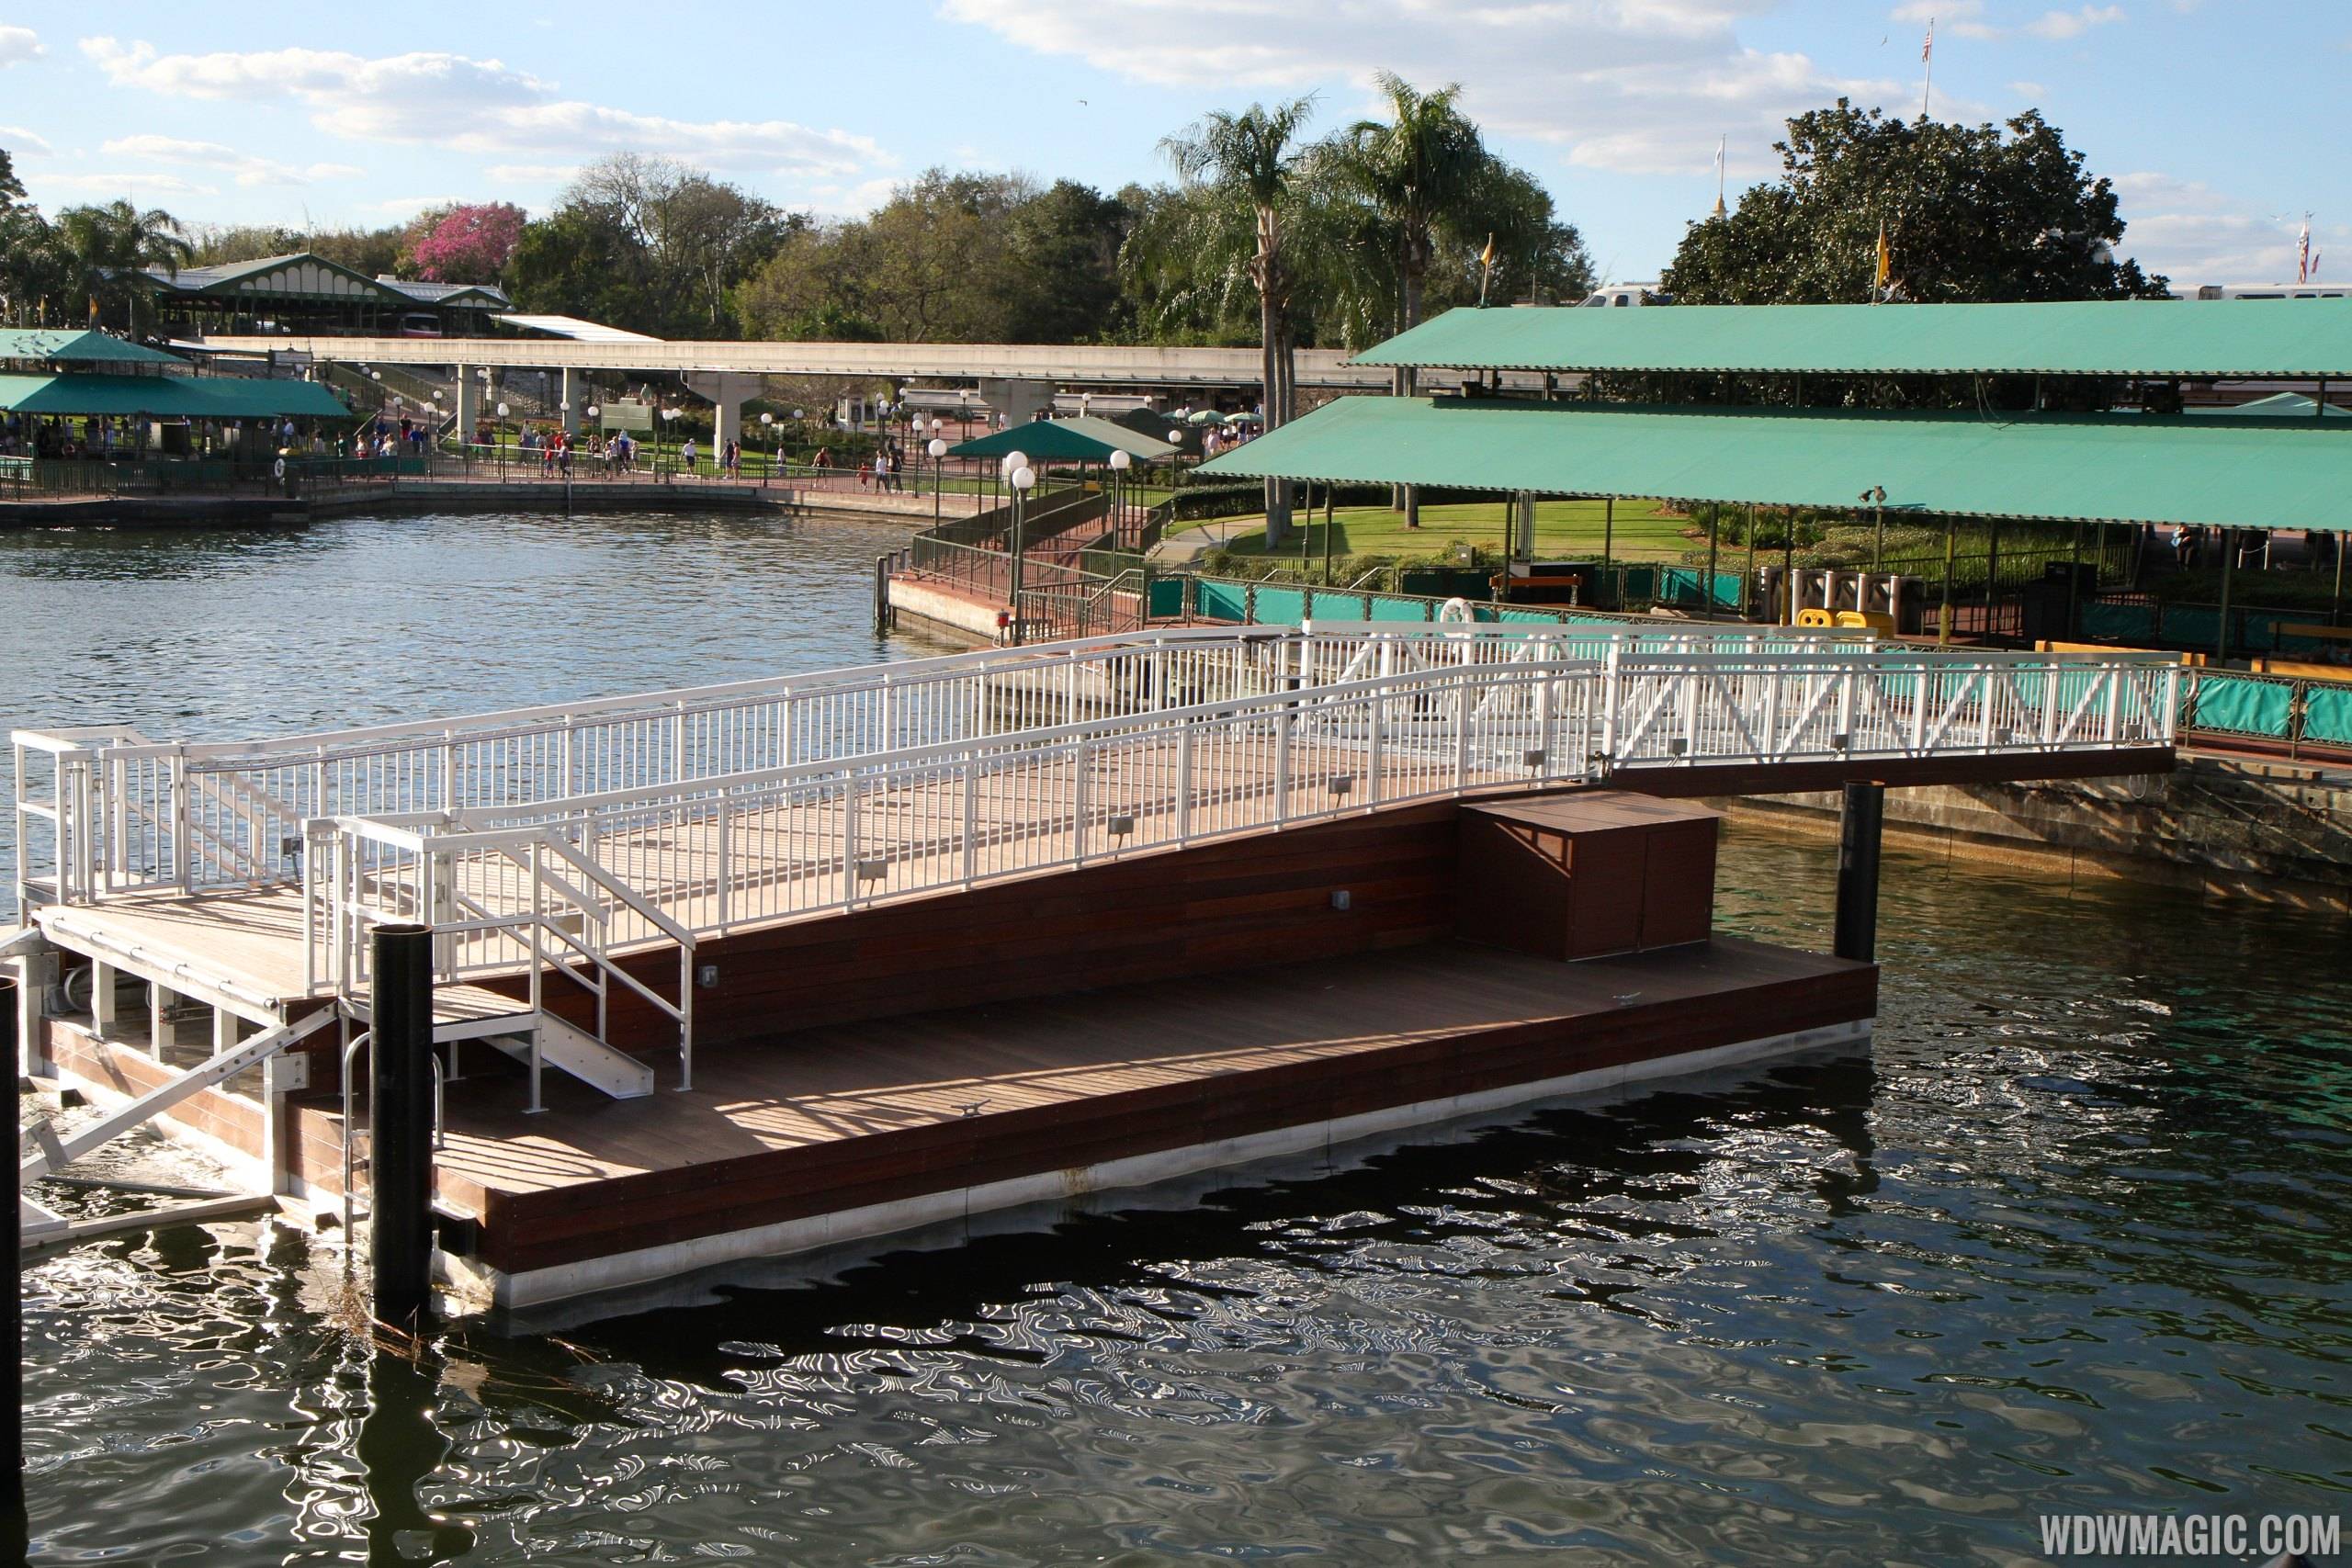 Second Ferry boat dock construction at the Magic Kingdom